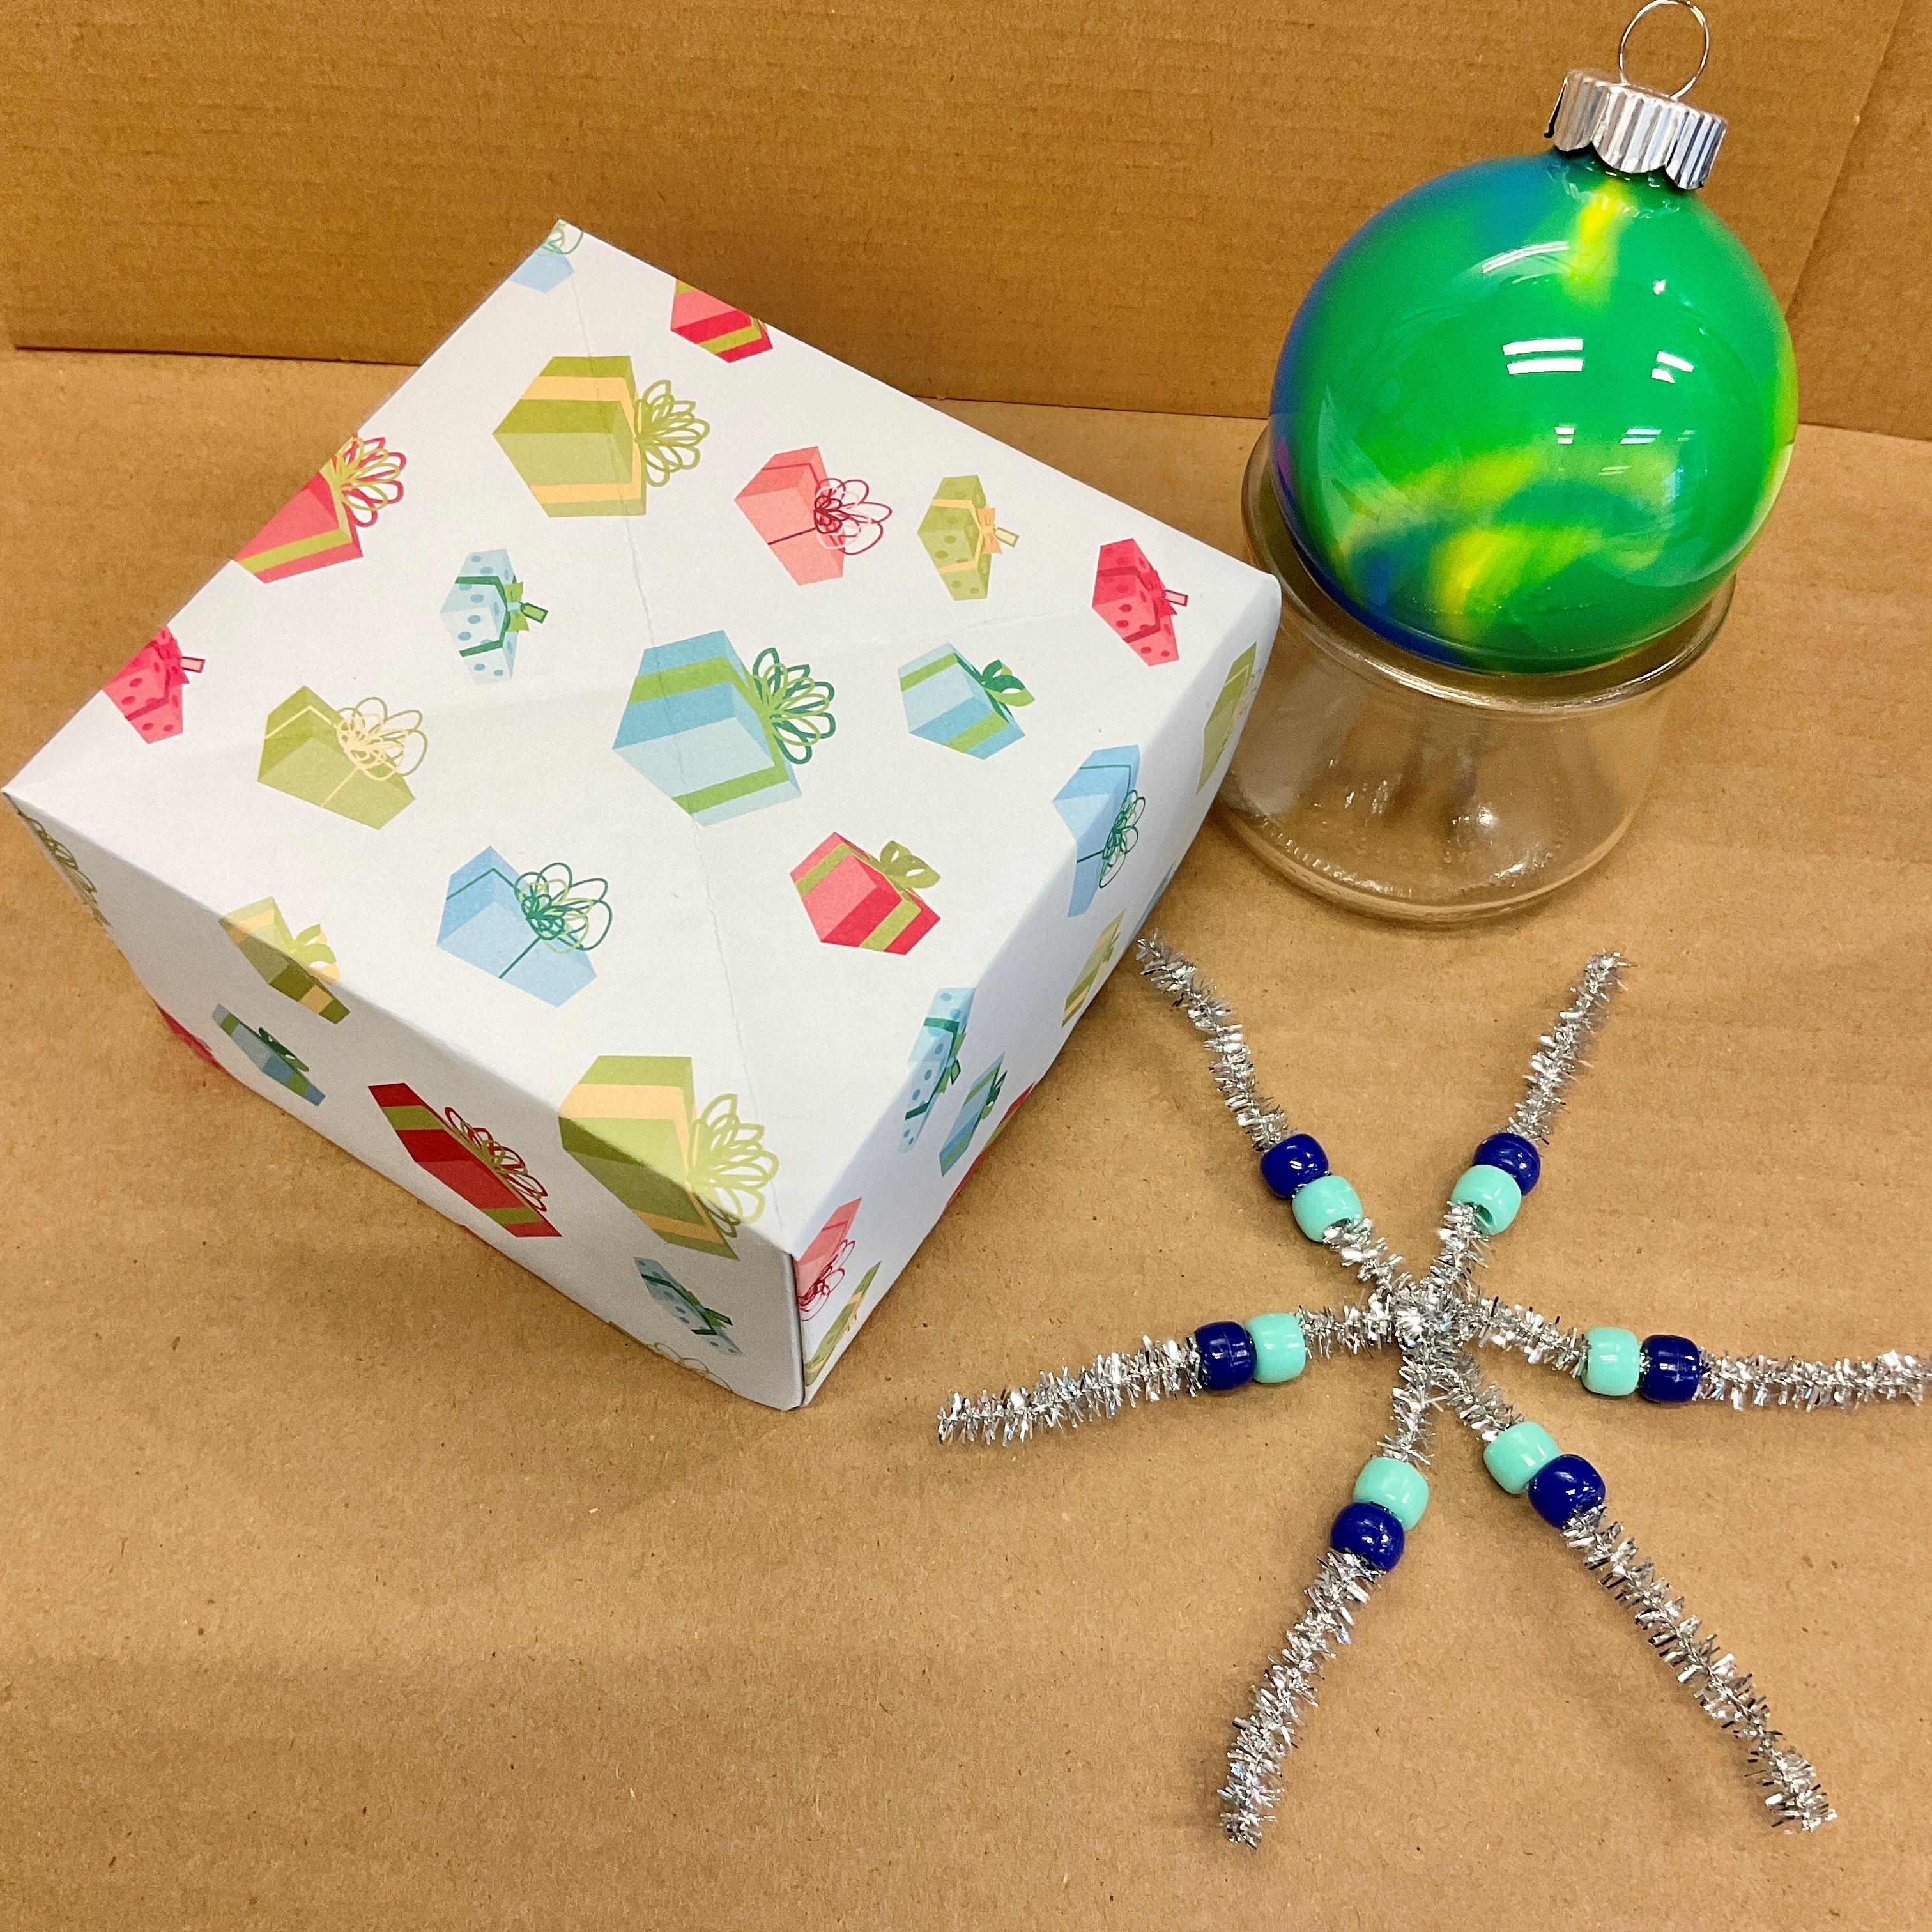 Ornaments and gift box